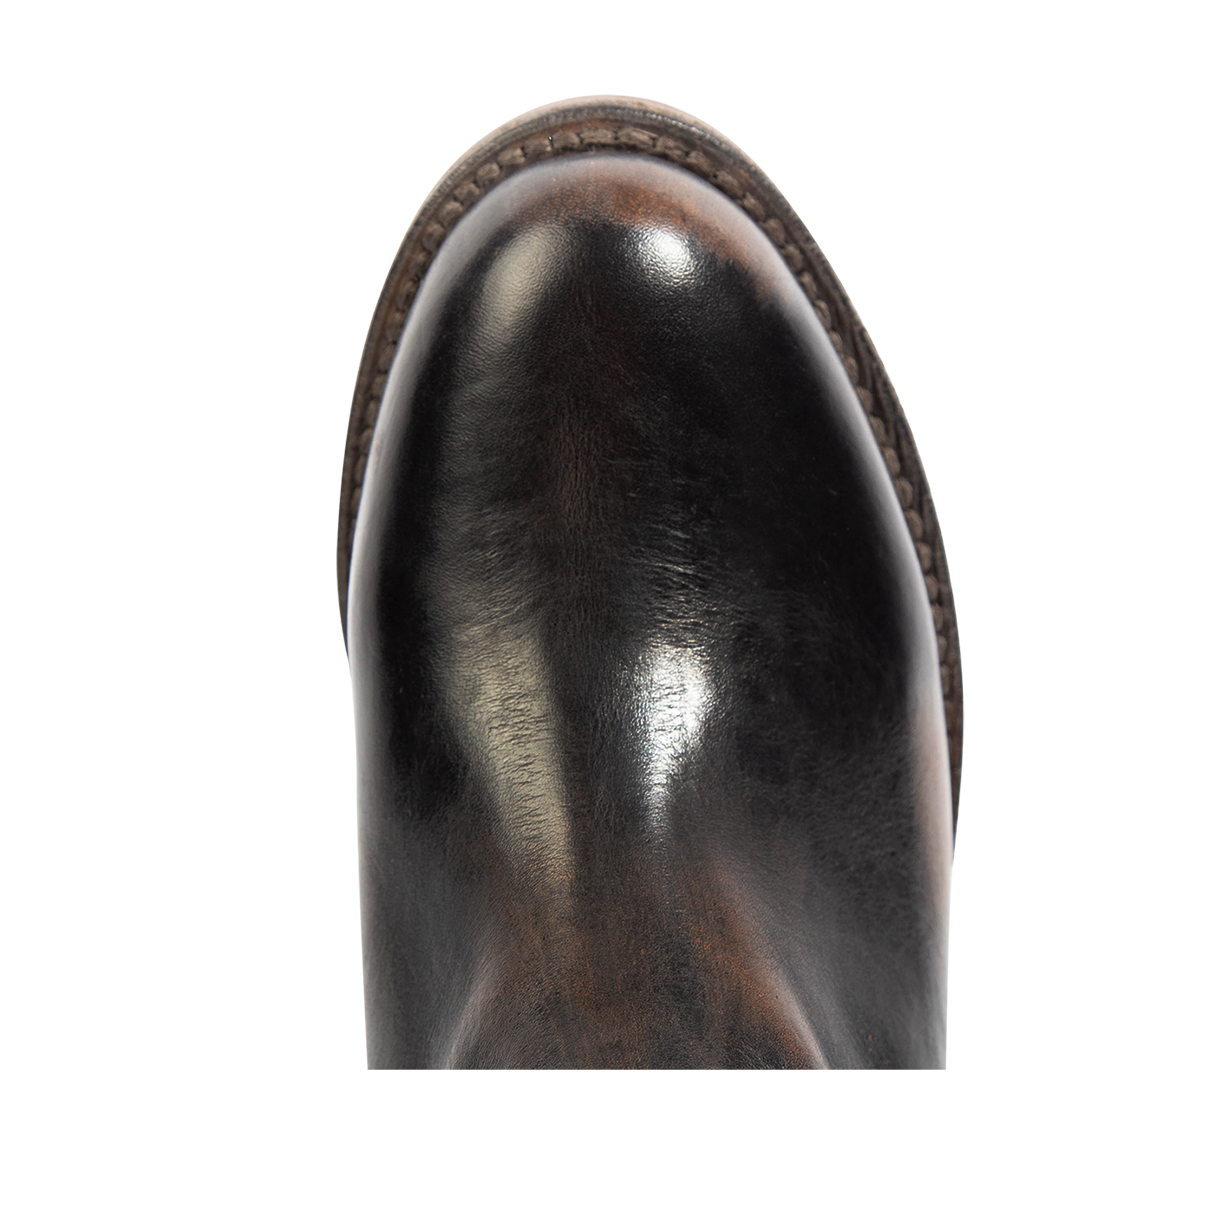 Top view showing slim round toe construction on FREEBIRD women's Rigger black leather boot